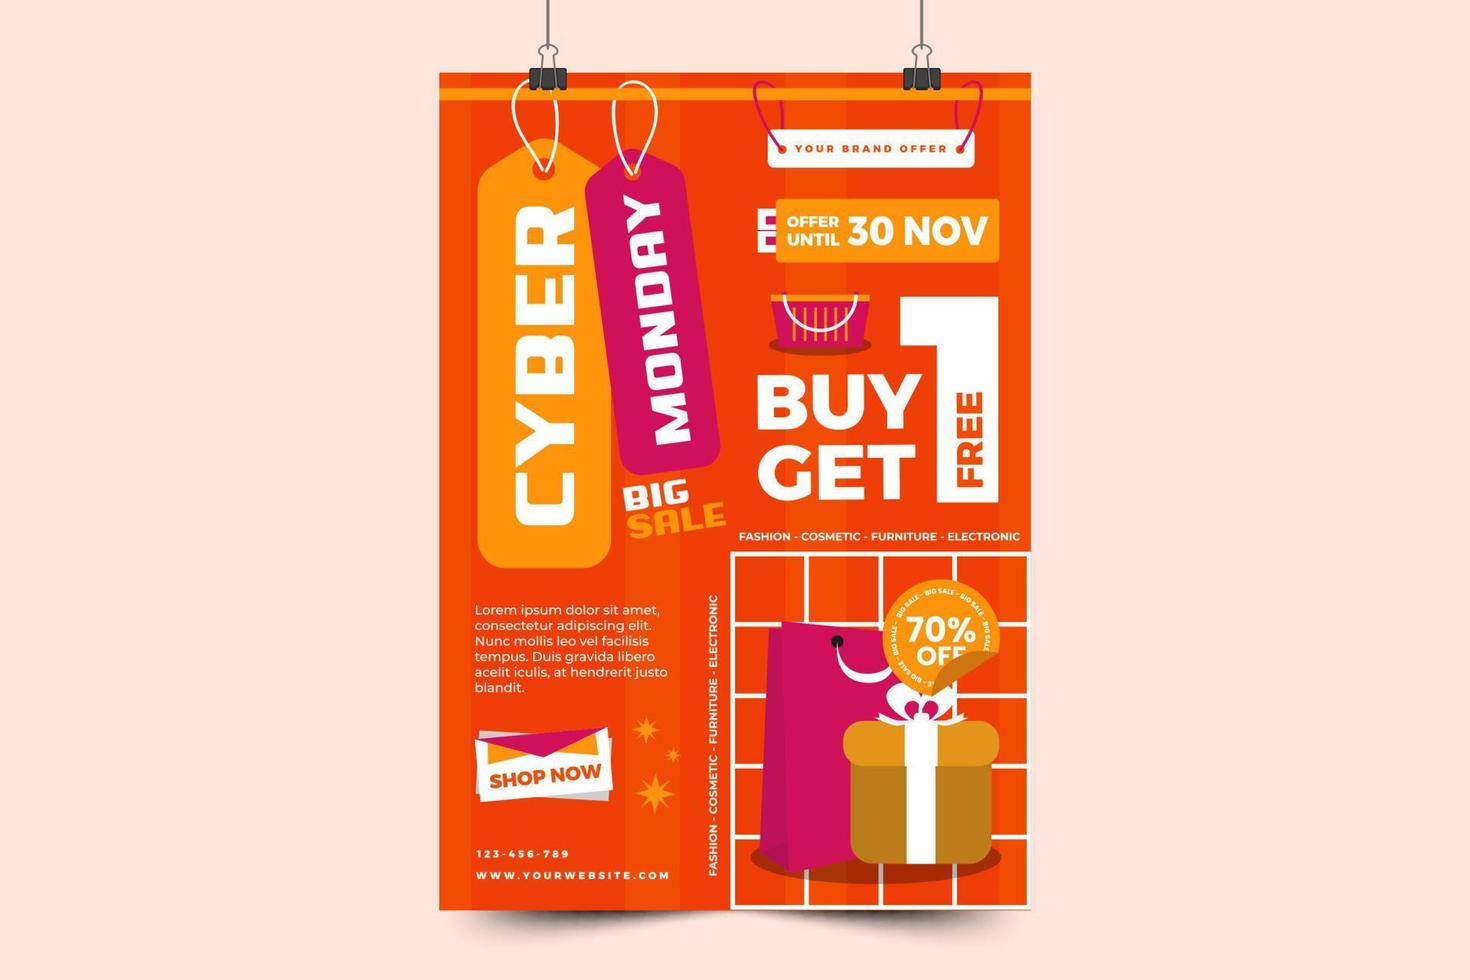 Cyber Monday poster or flyer design template is easy to customize vector